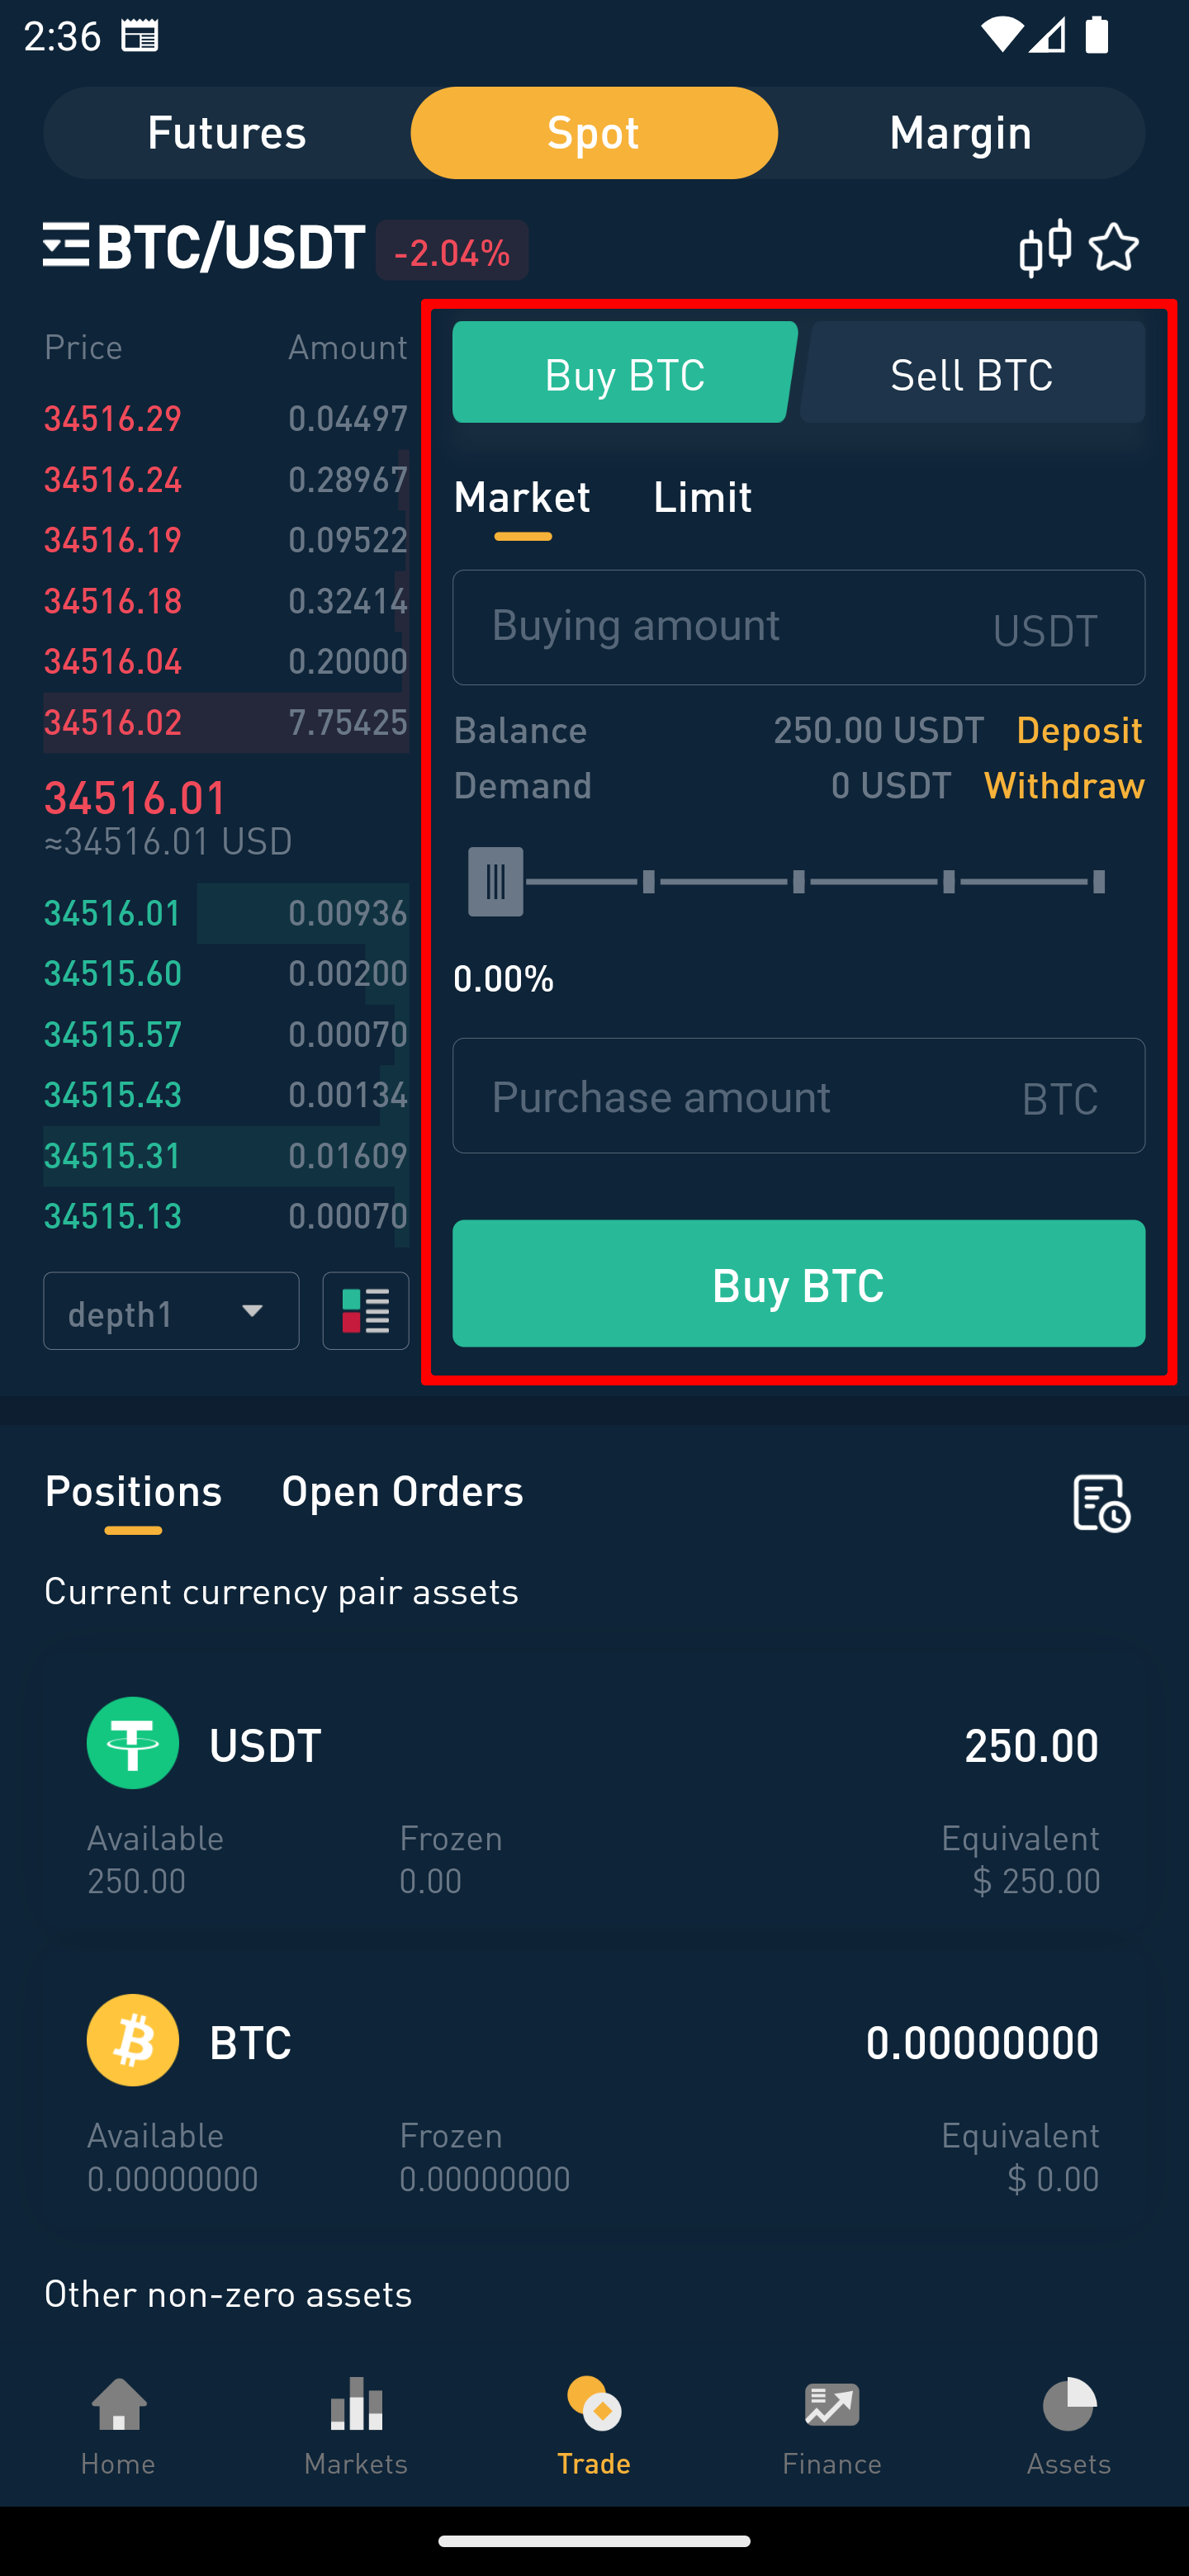 screenshot of 8V app spot trading interface with create order section highlighted